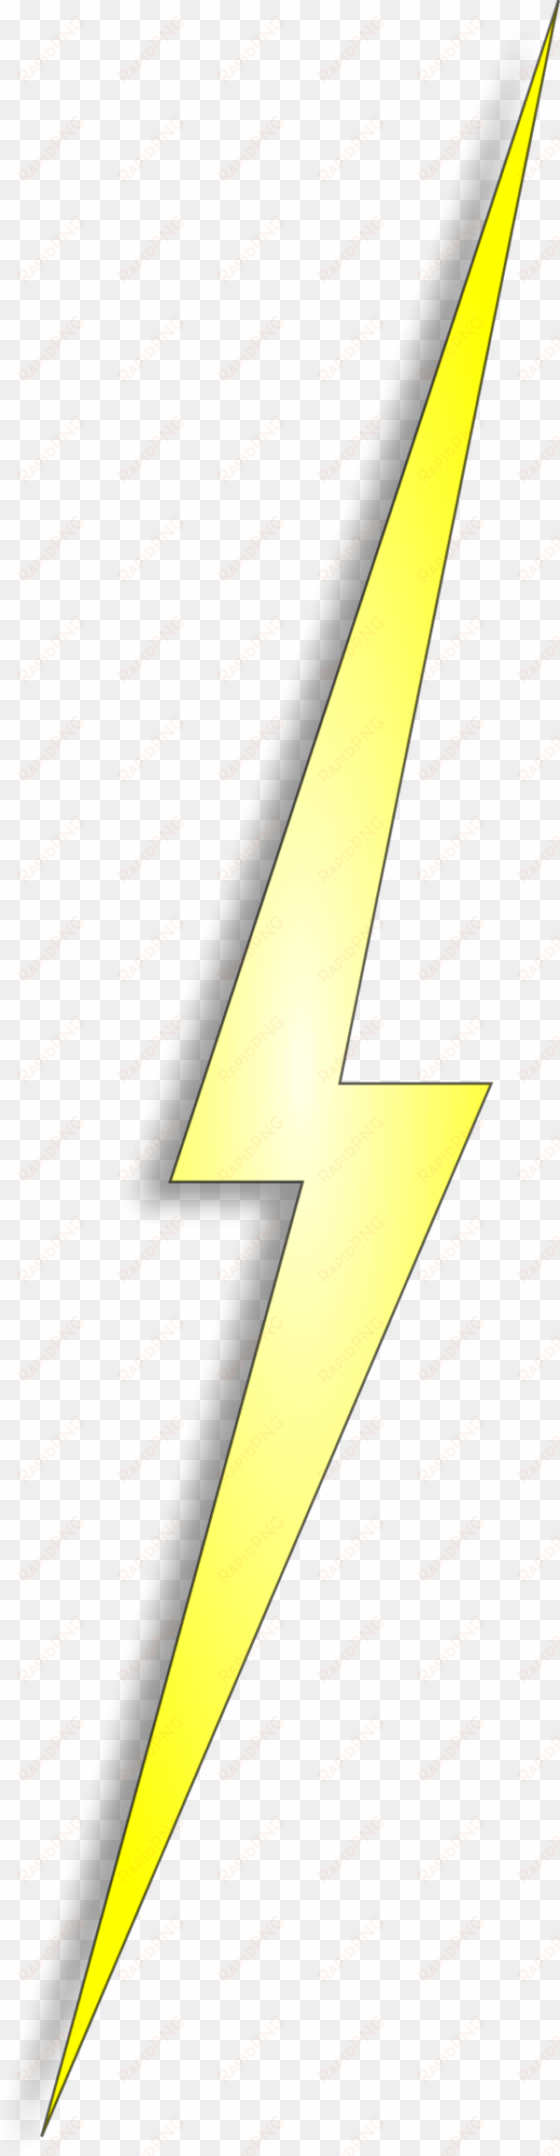 electricity clipart lightning - parallel